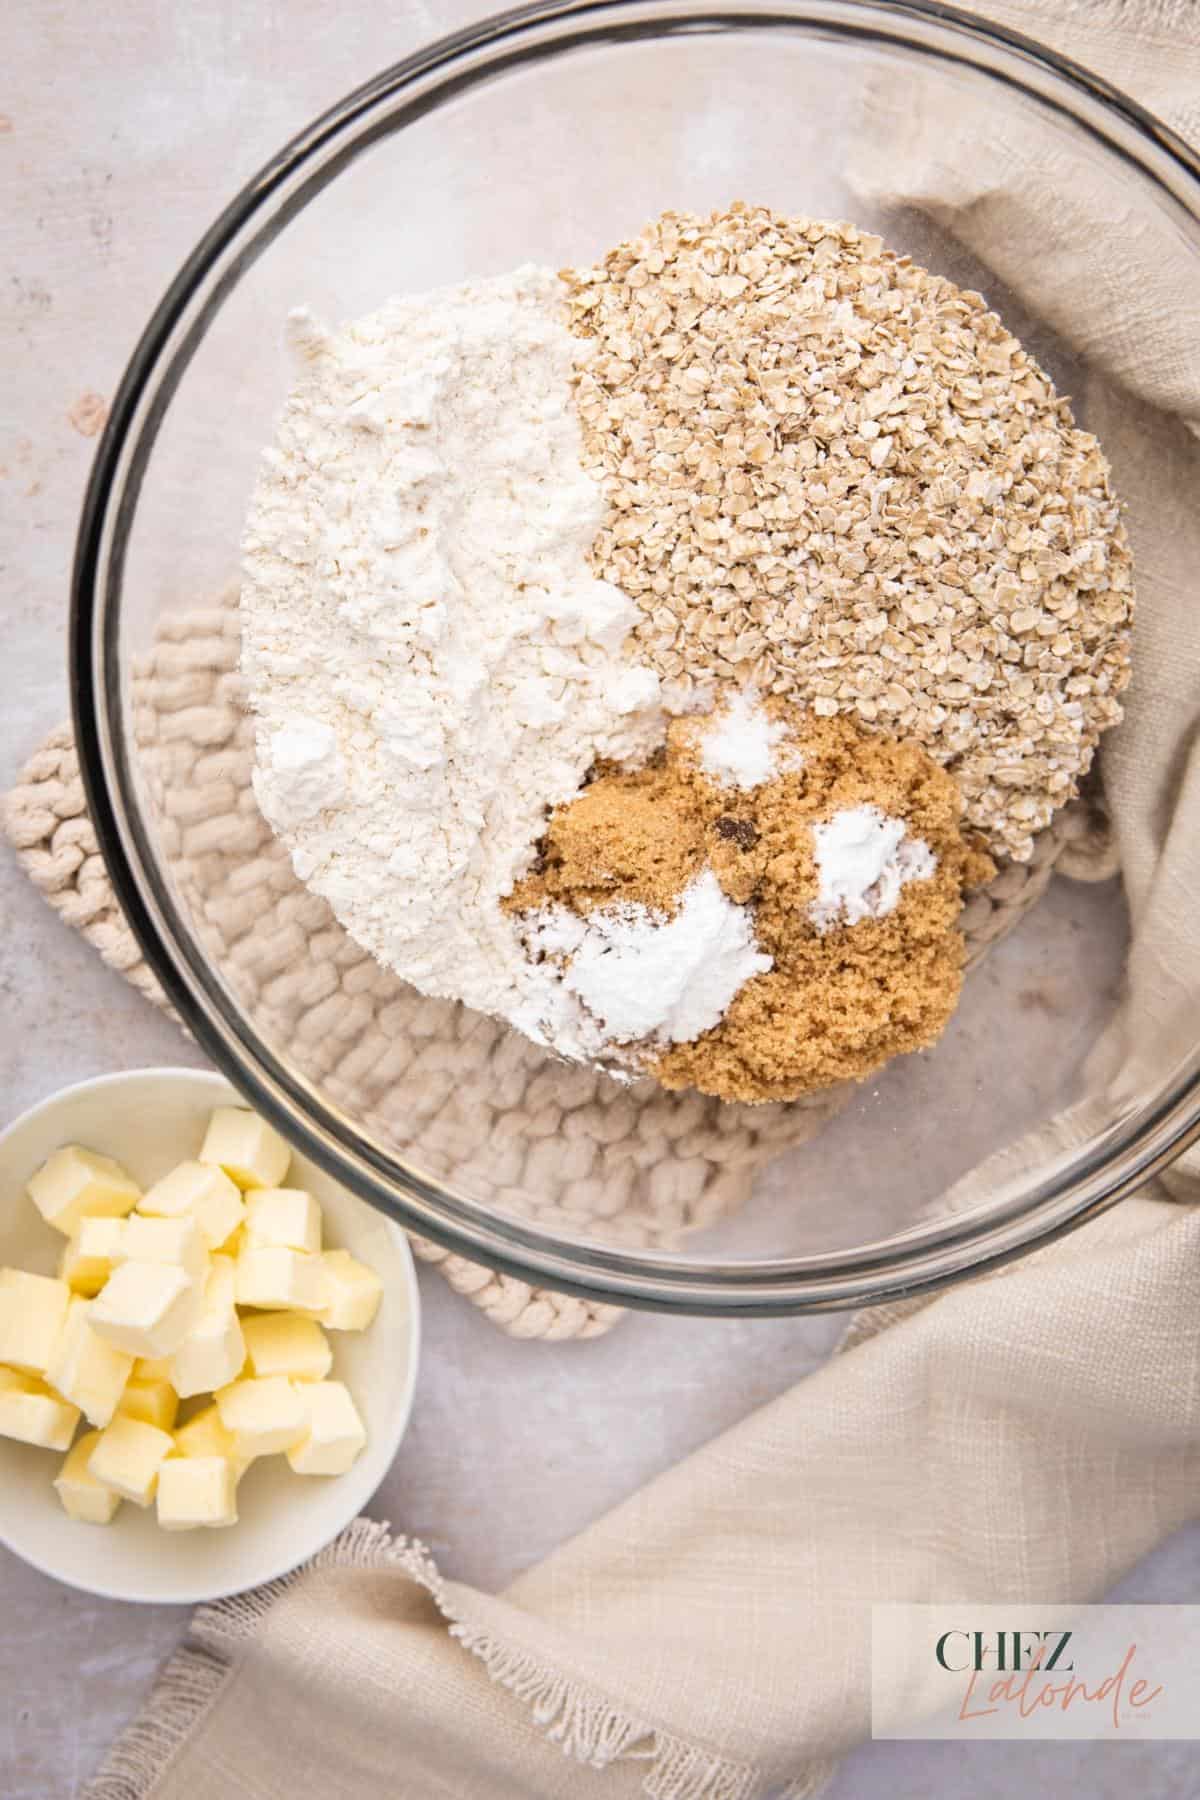 A bowl of oatmeal, butter, and other ingredients.